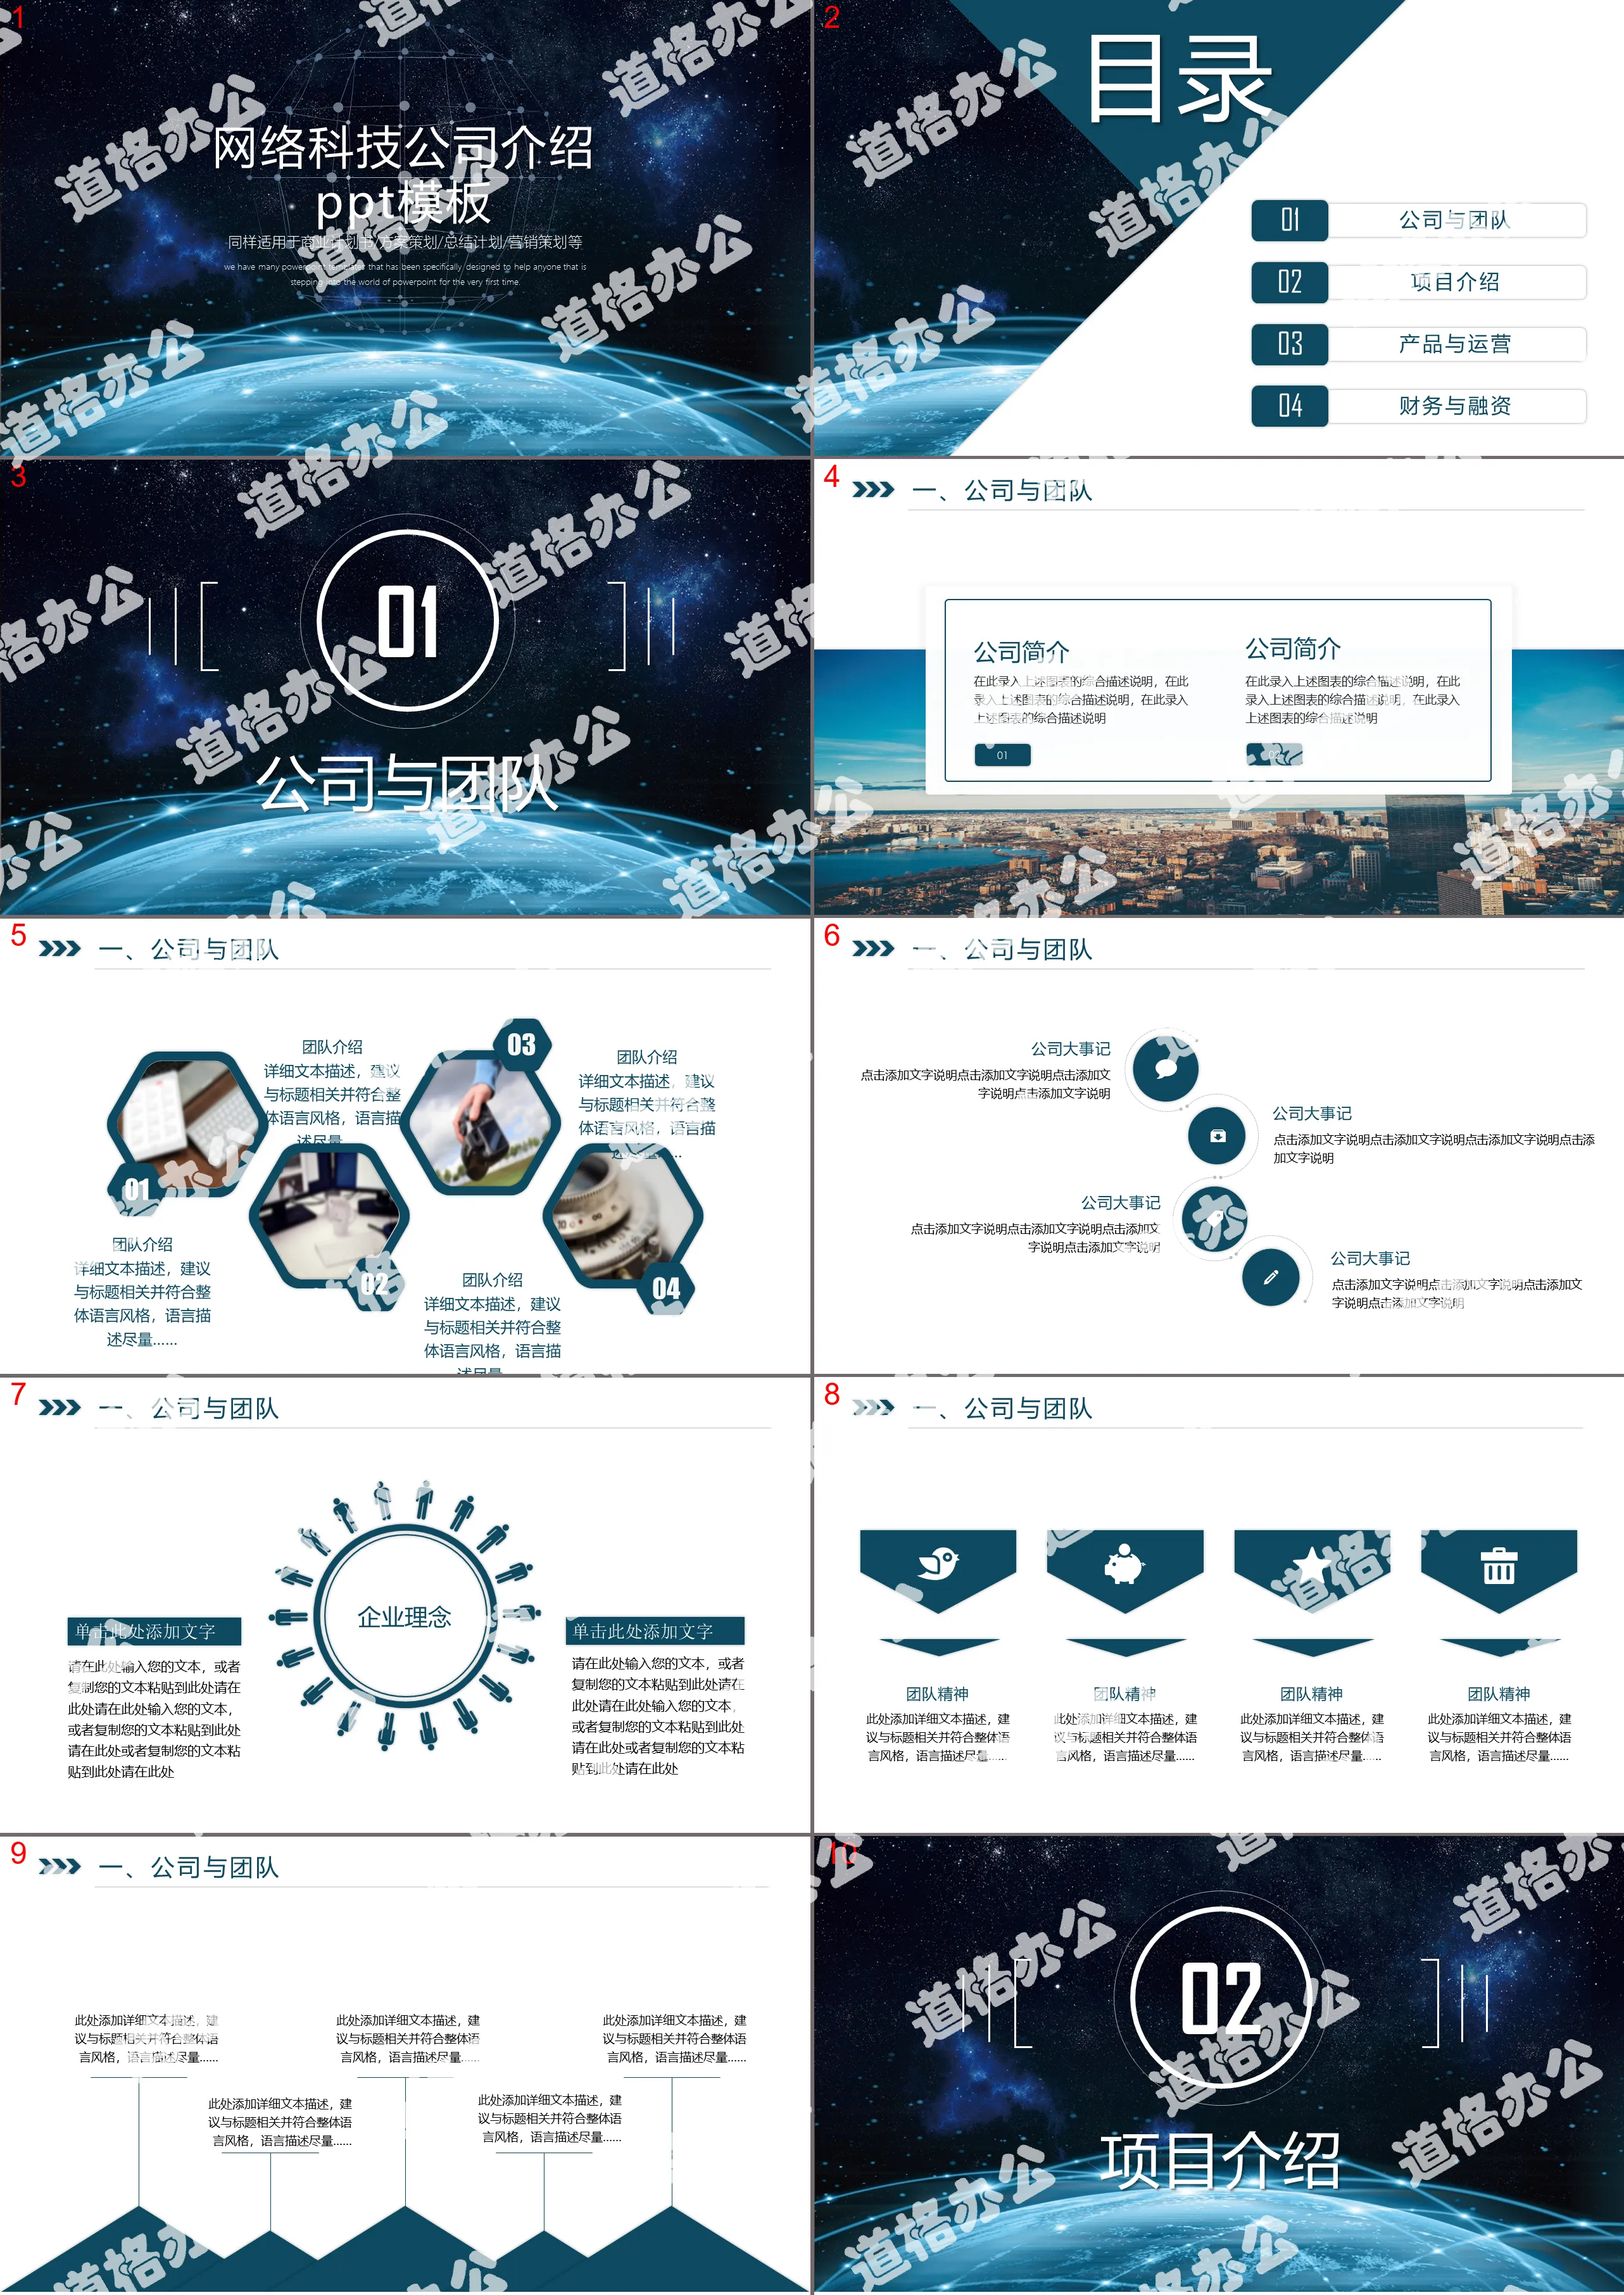 Network technology company introduction PPT template with cool starry sky interconnected earth background